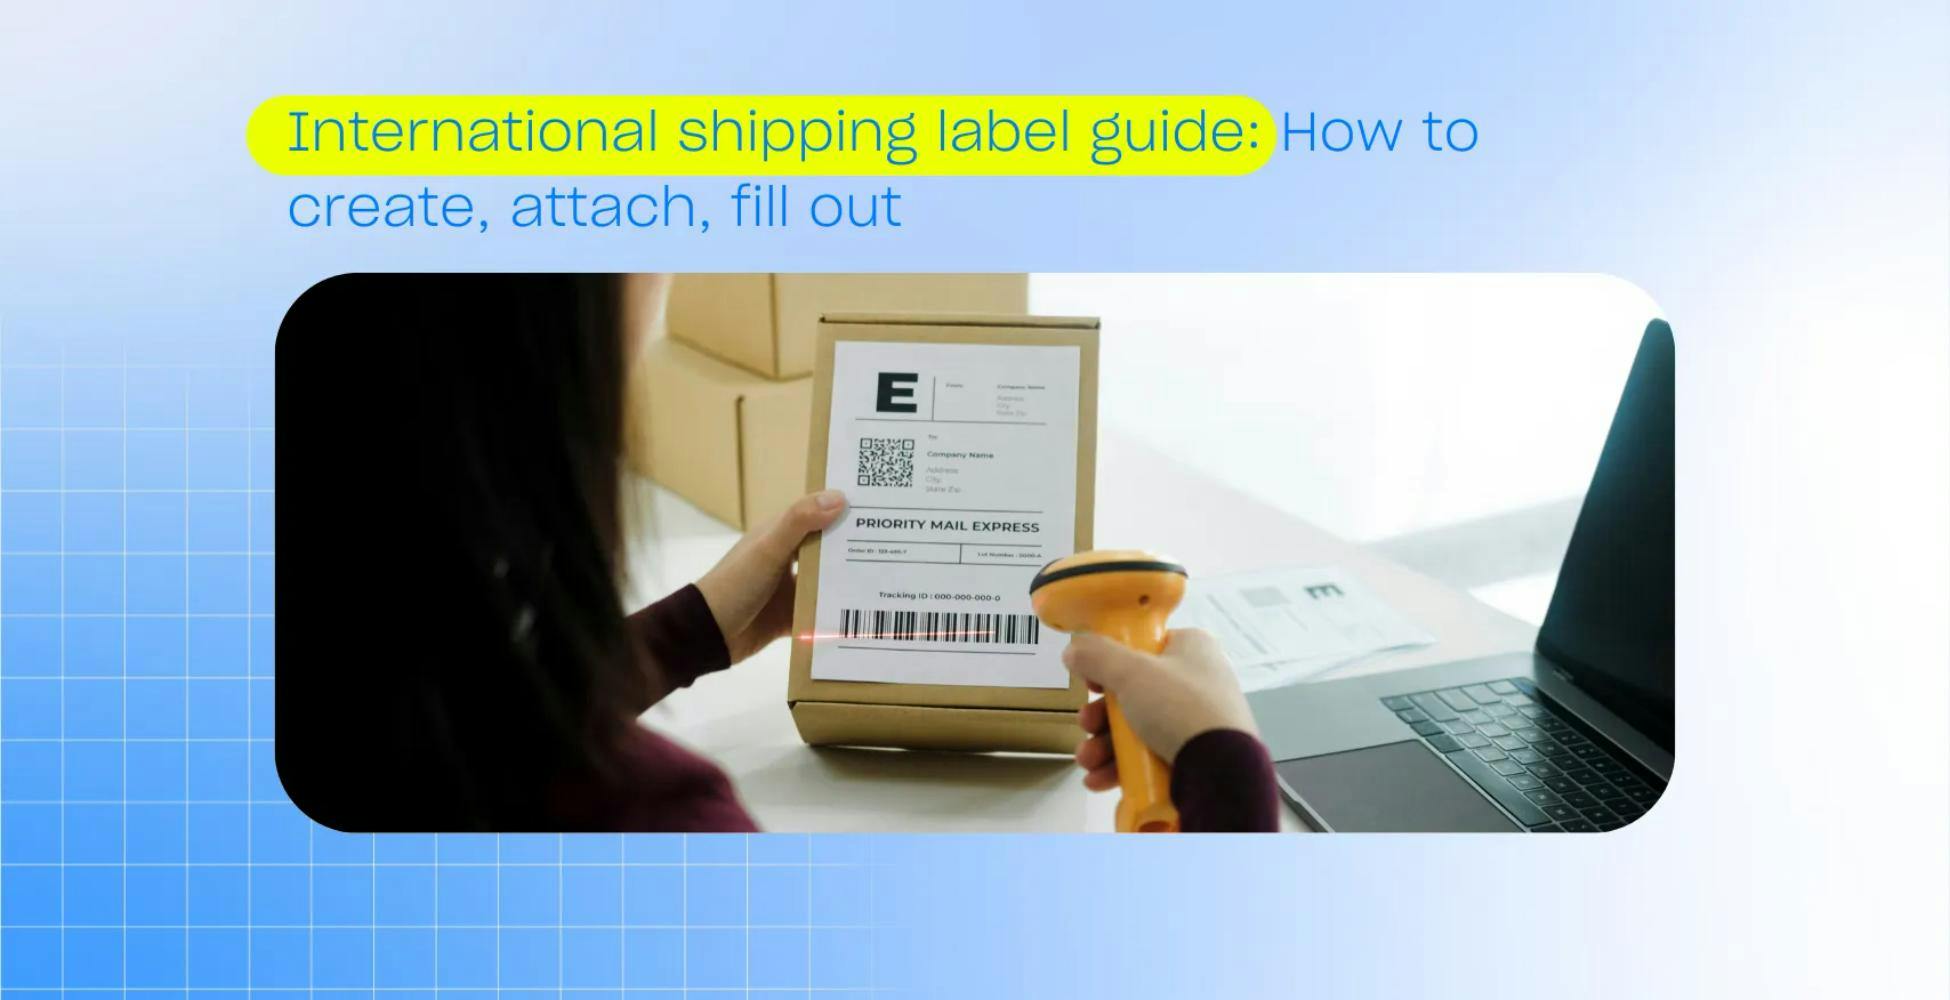 International shipping label guide